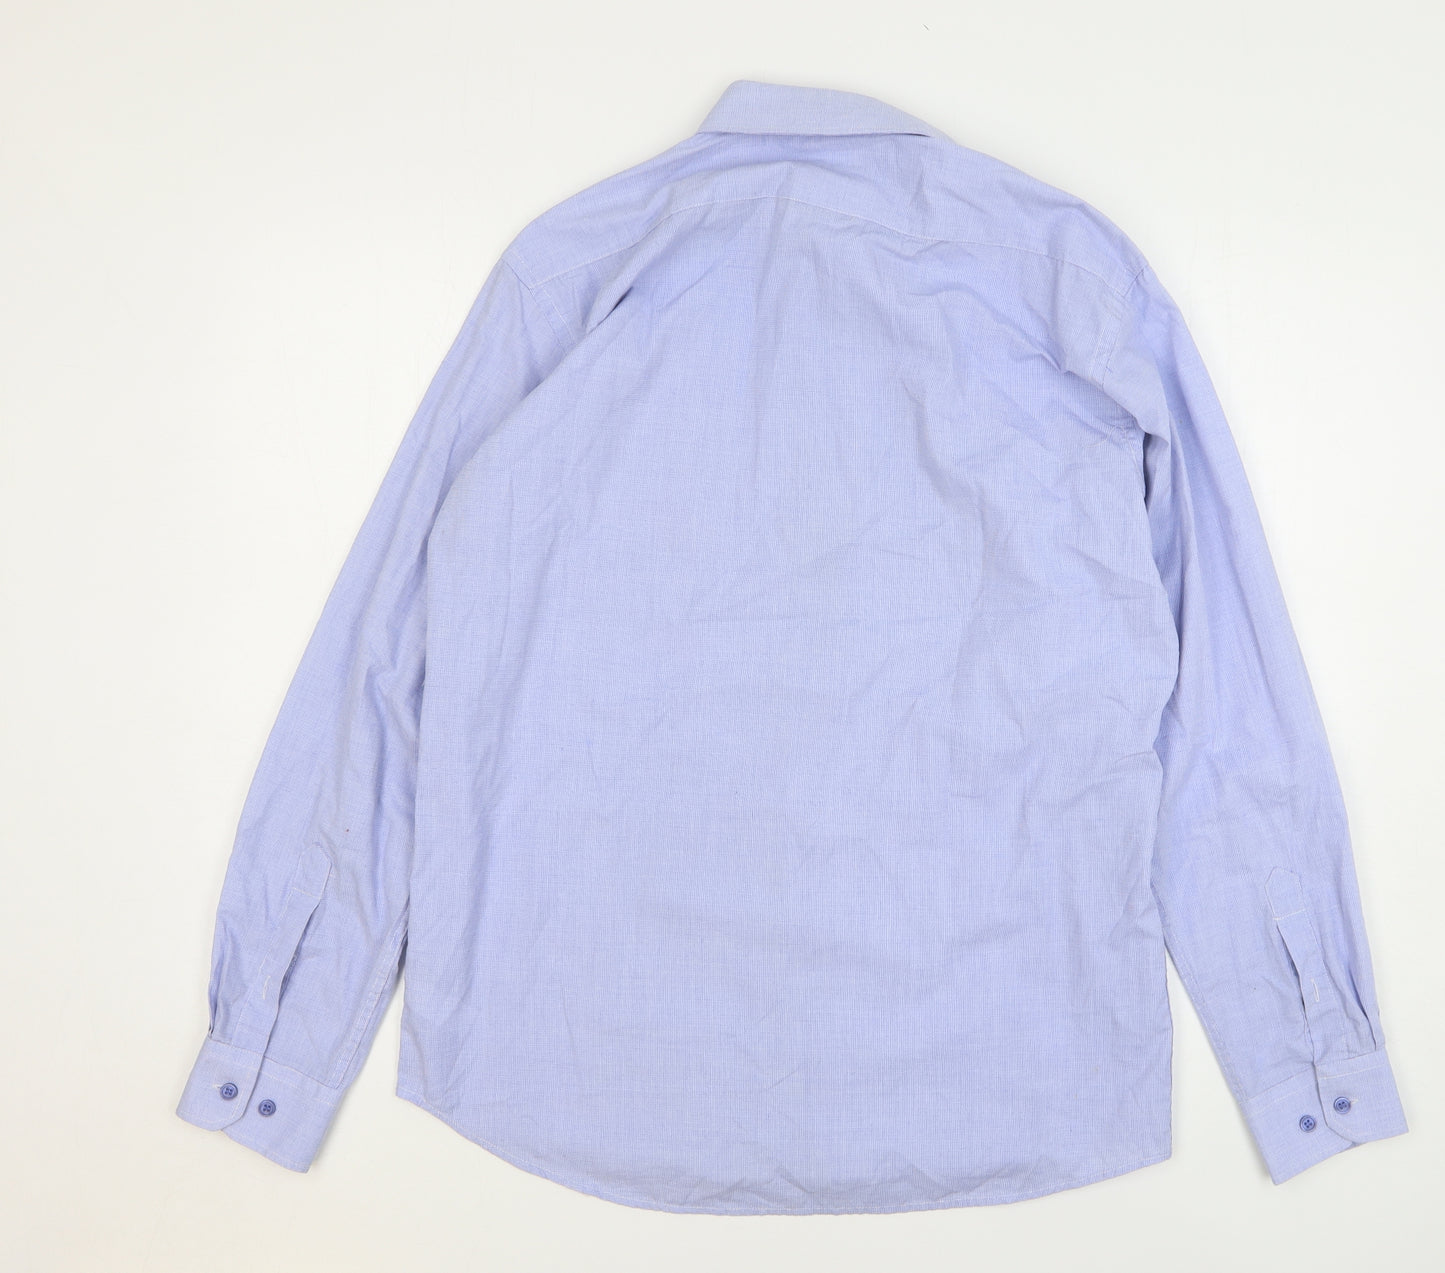 Dunnes Stores Mens Blue Polyester Dress Shirt Size 16 Collared Button